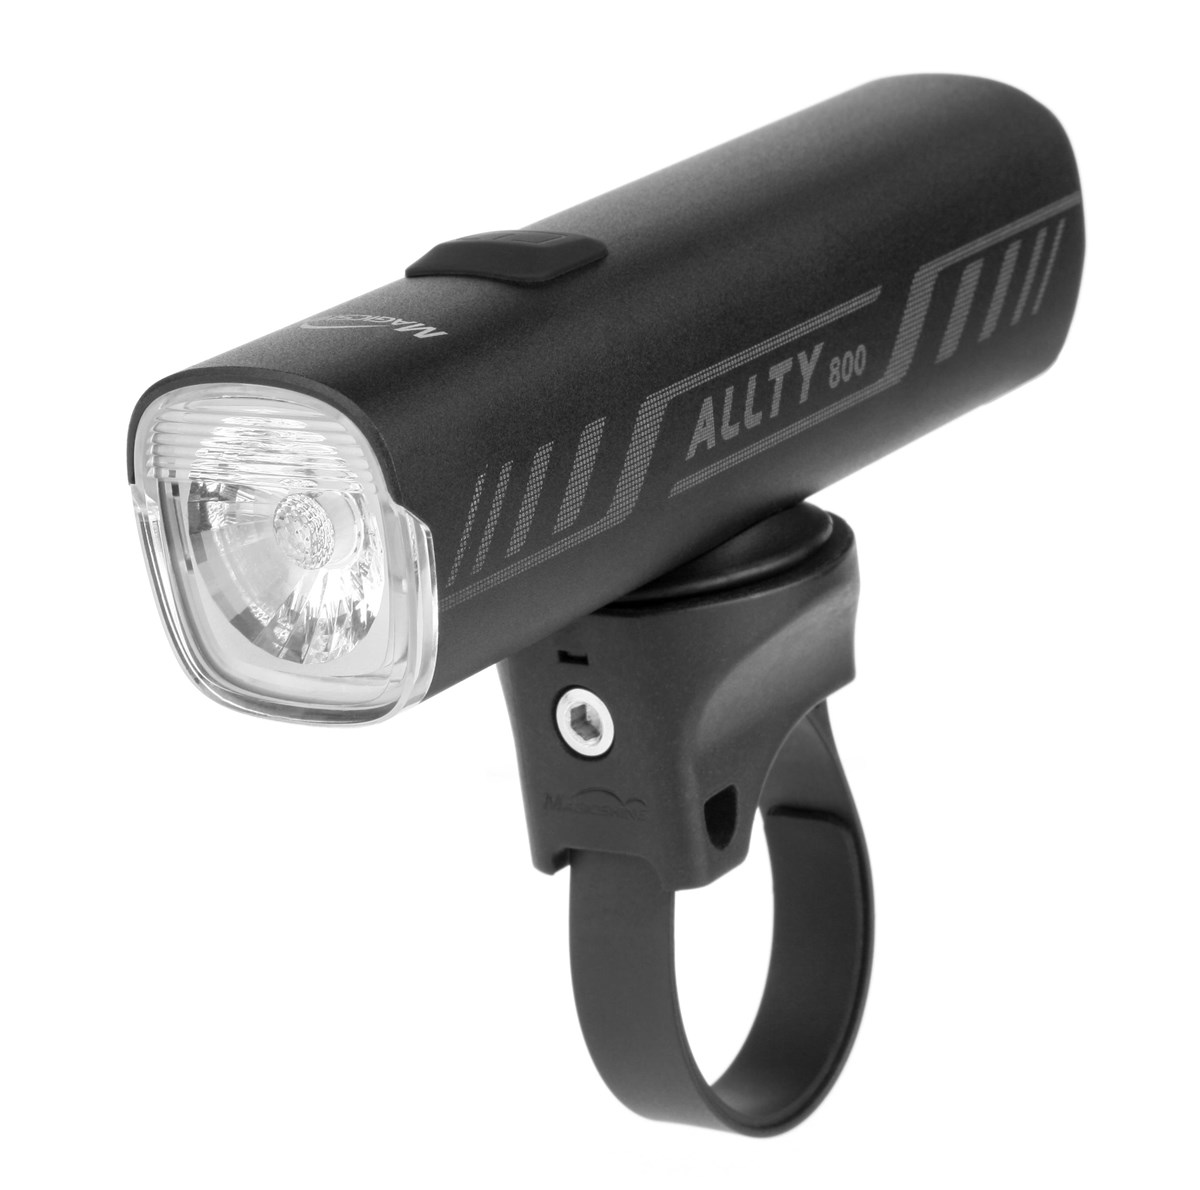 Magicshine Allty 800 Front Light product image